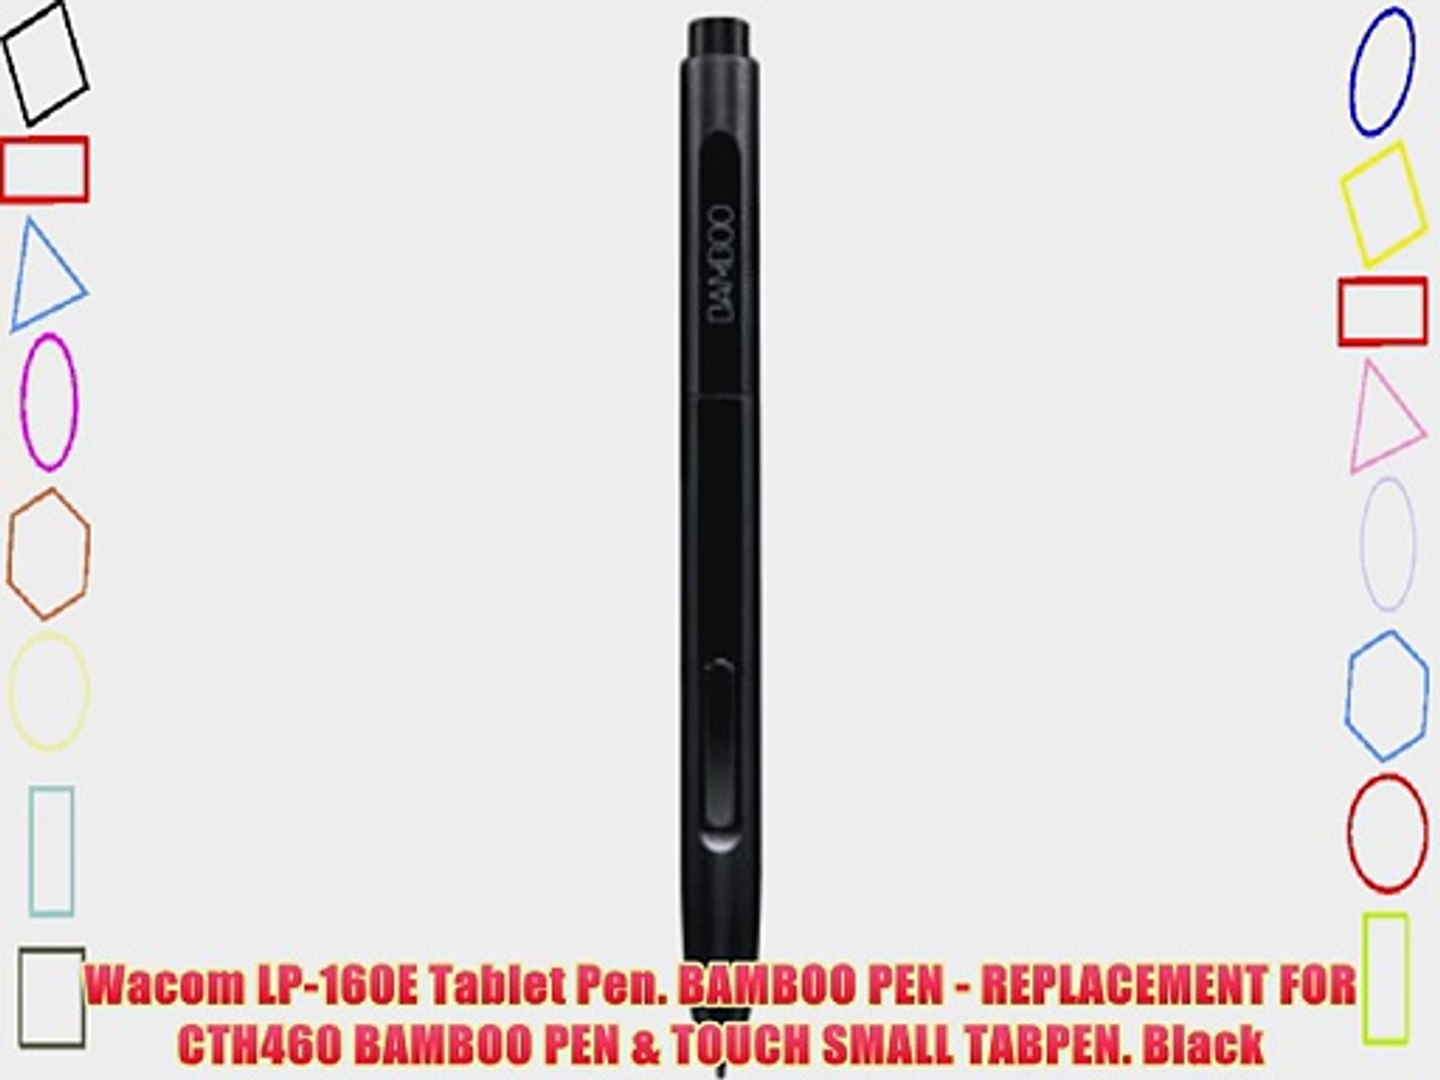 Wacom LP-160E Tablet Pen. BAMBOO PEN - REPLACEMENT FOR CTH460 ...